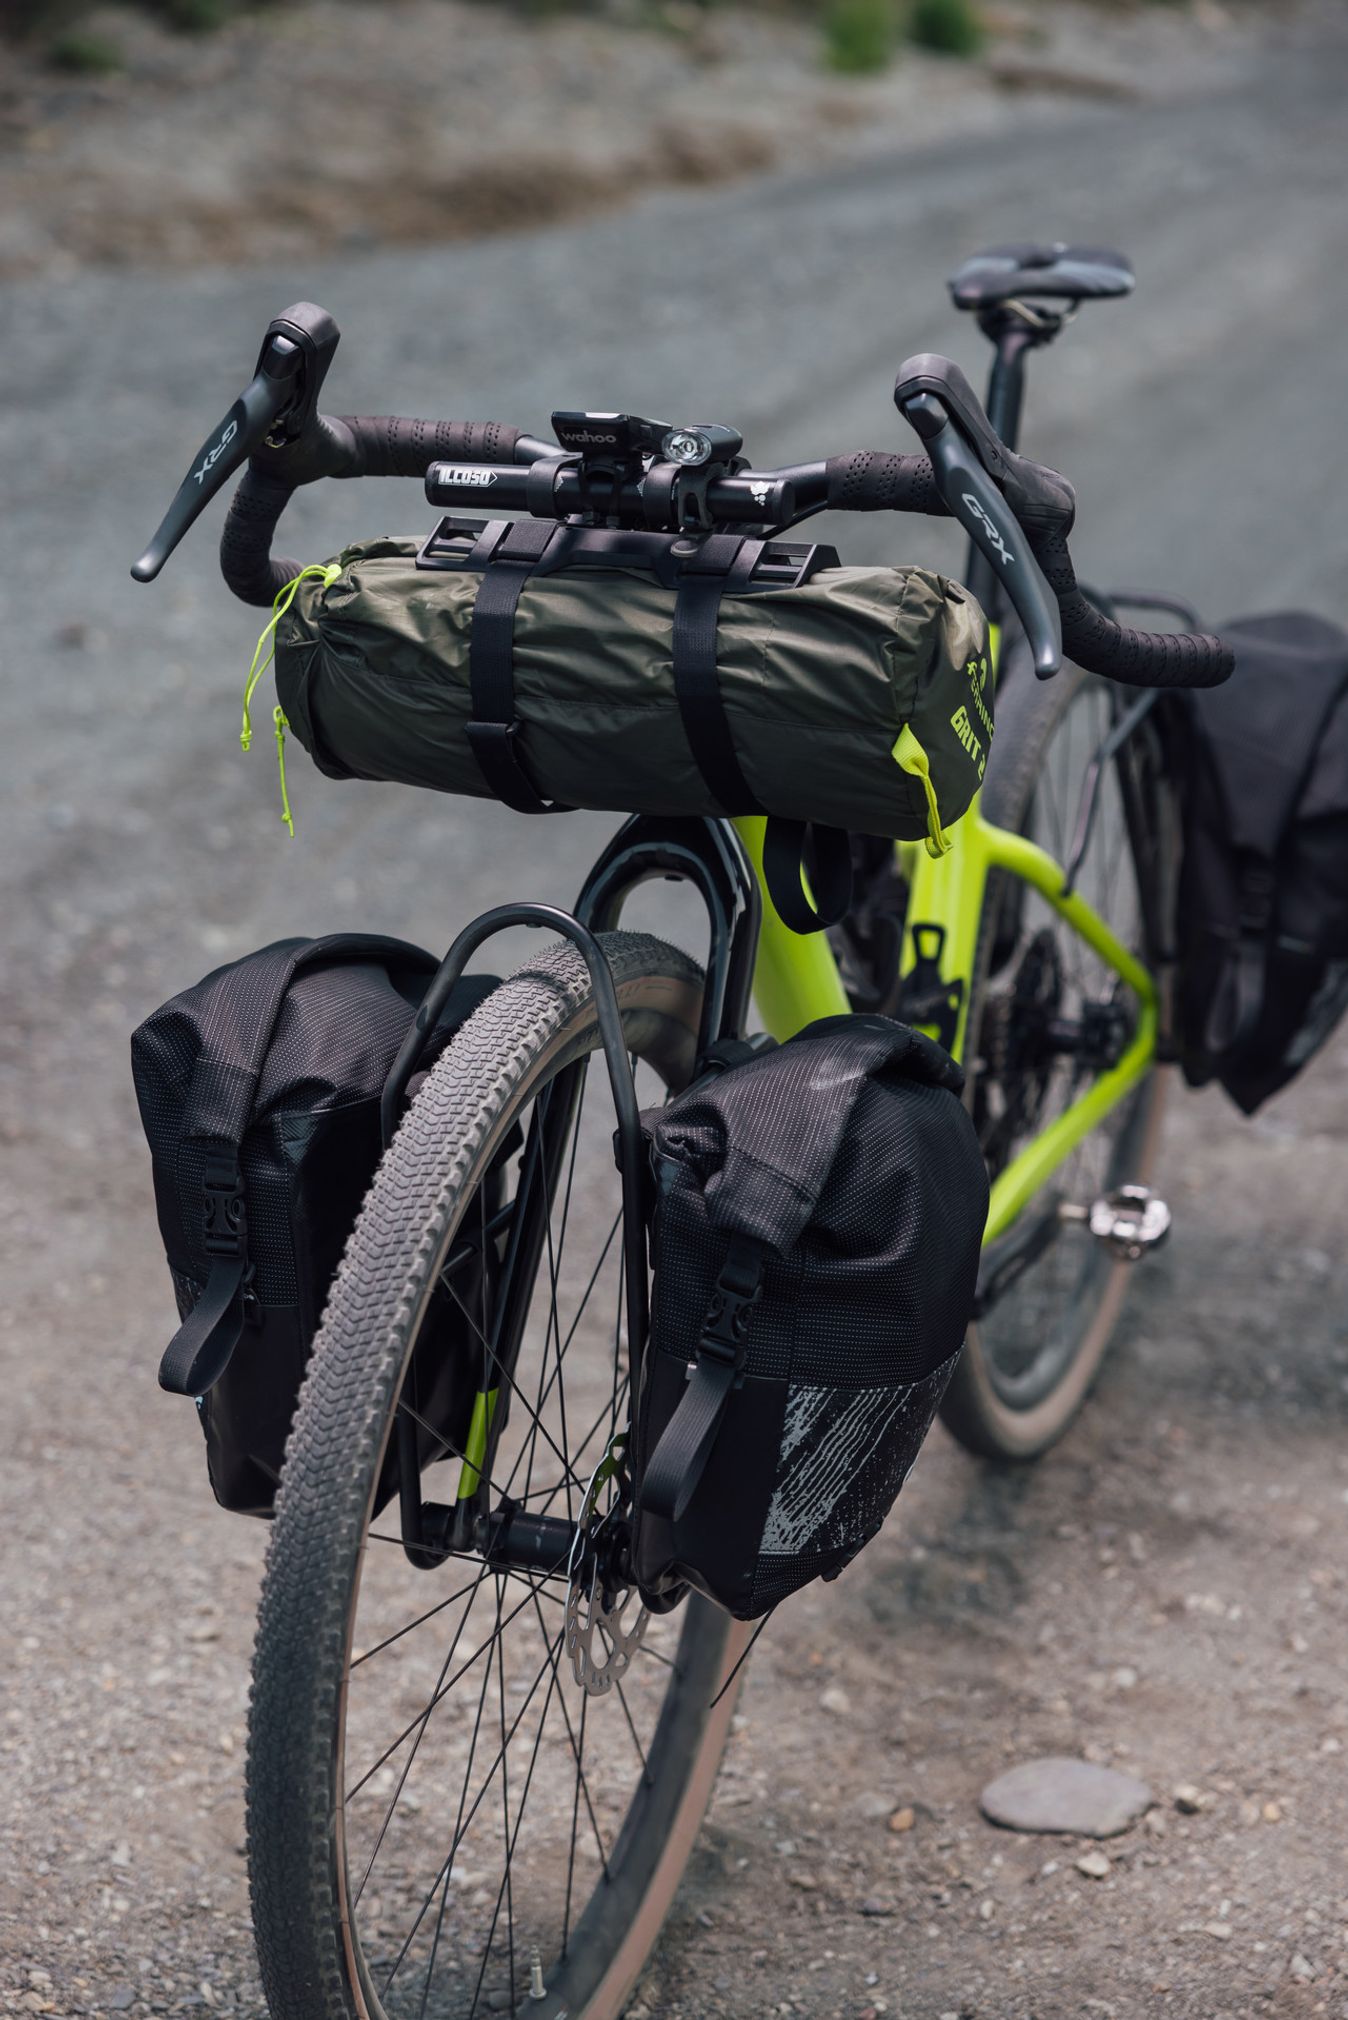 The bike is designed to carry a lot of luggage on the front of the bike so a shorter stem allows for more direct control when it is fully loaded